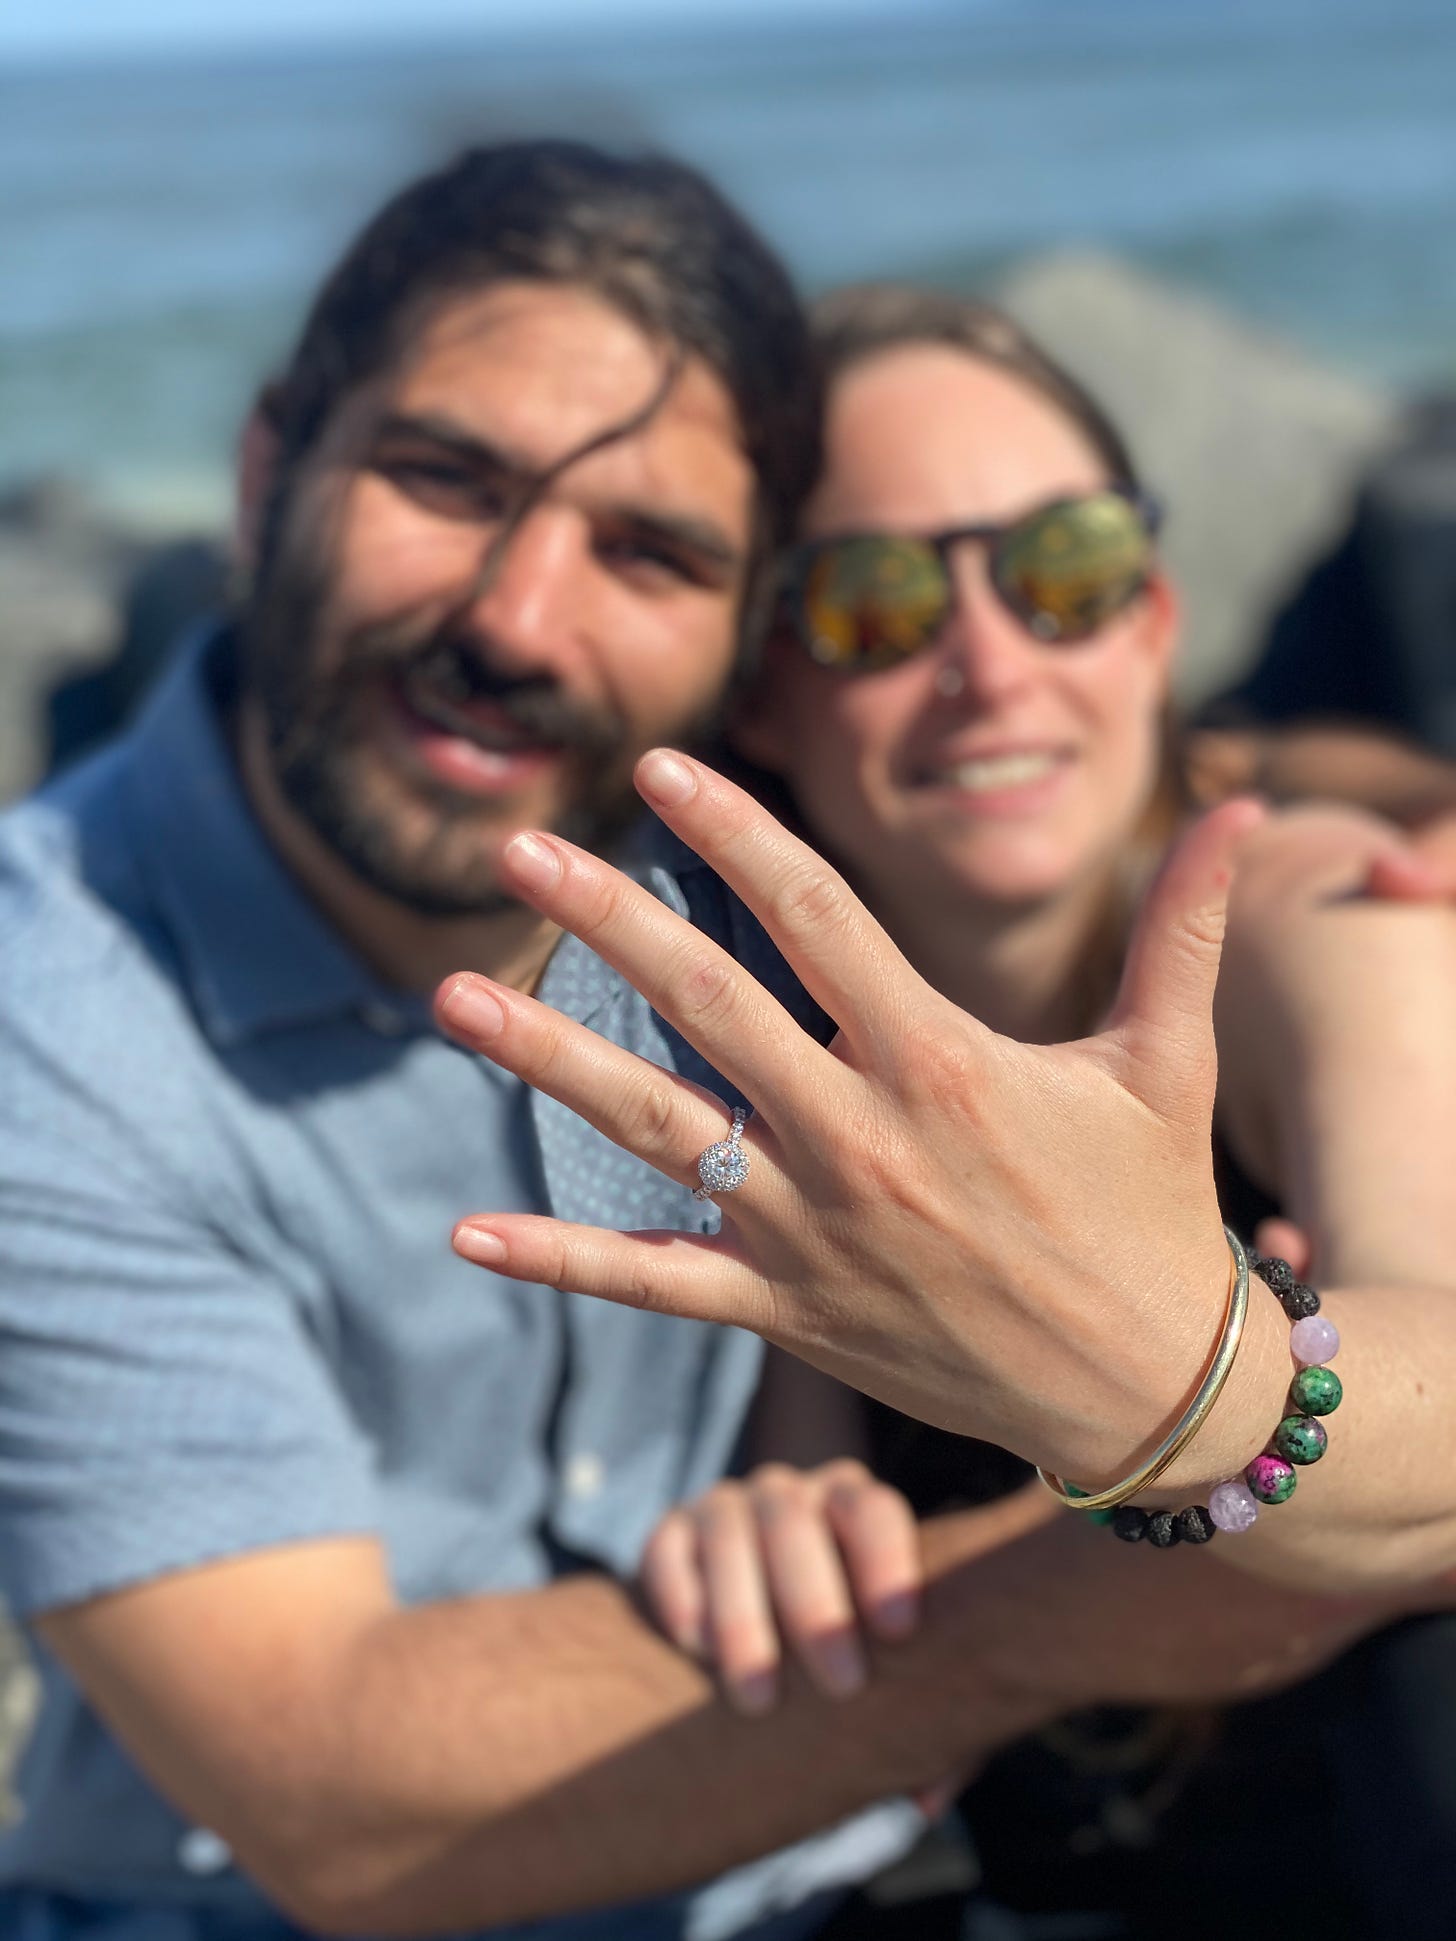 anthony and kelly pose engagement ring up